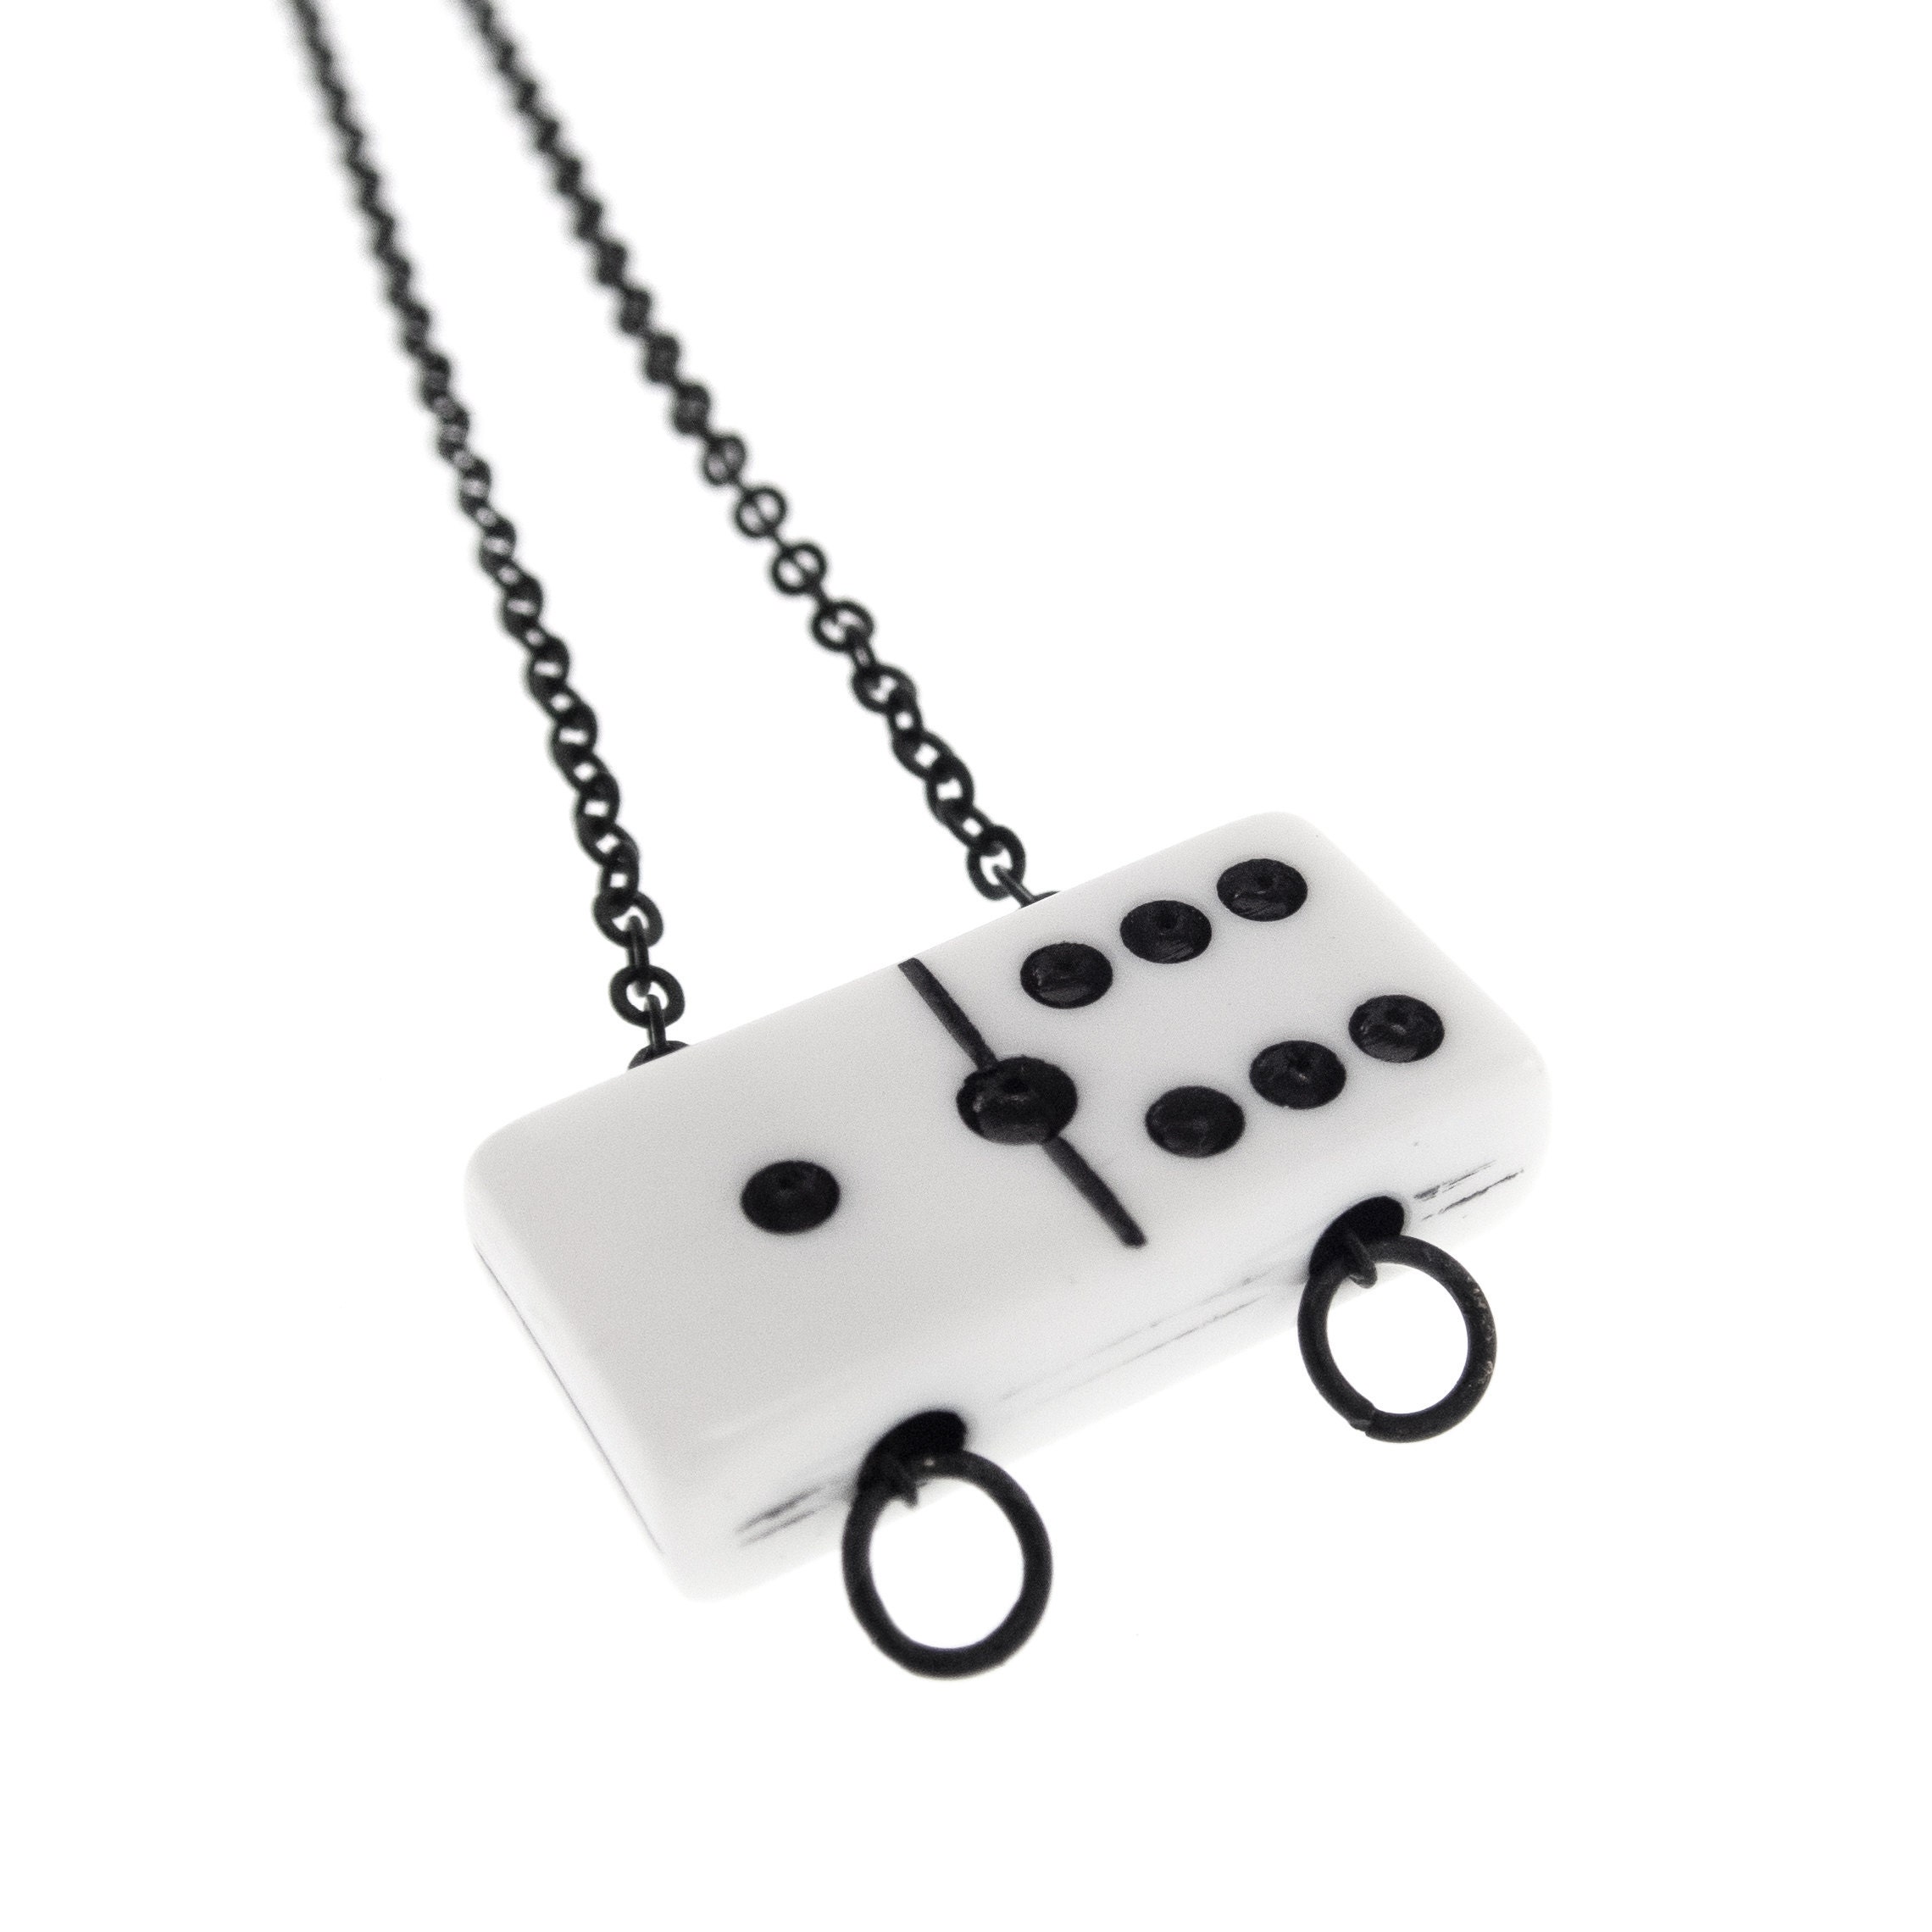 handmade domino necklace with domino tile charm